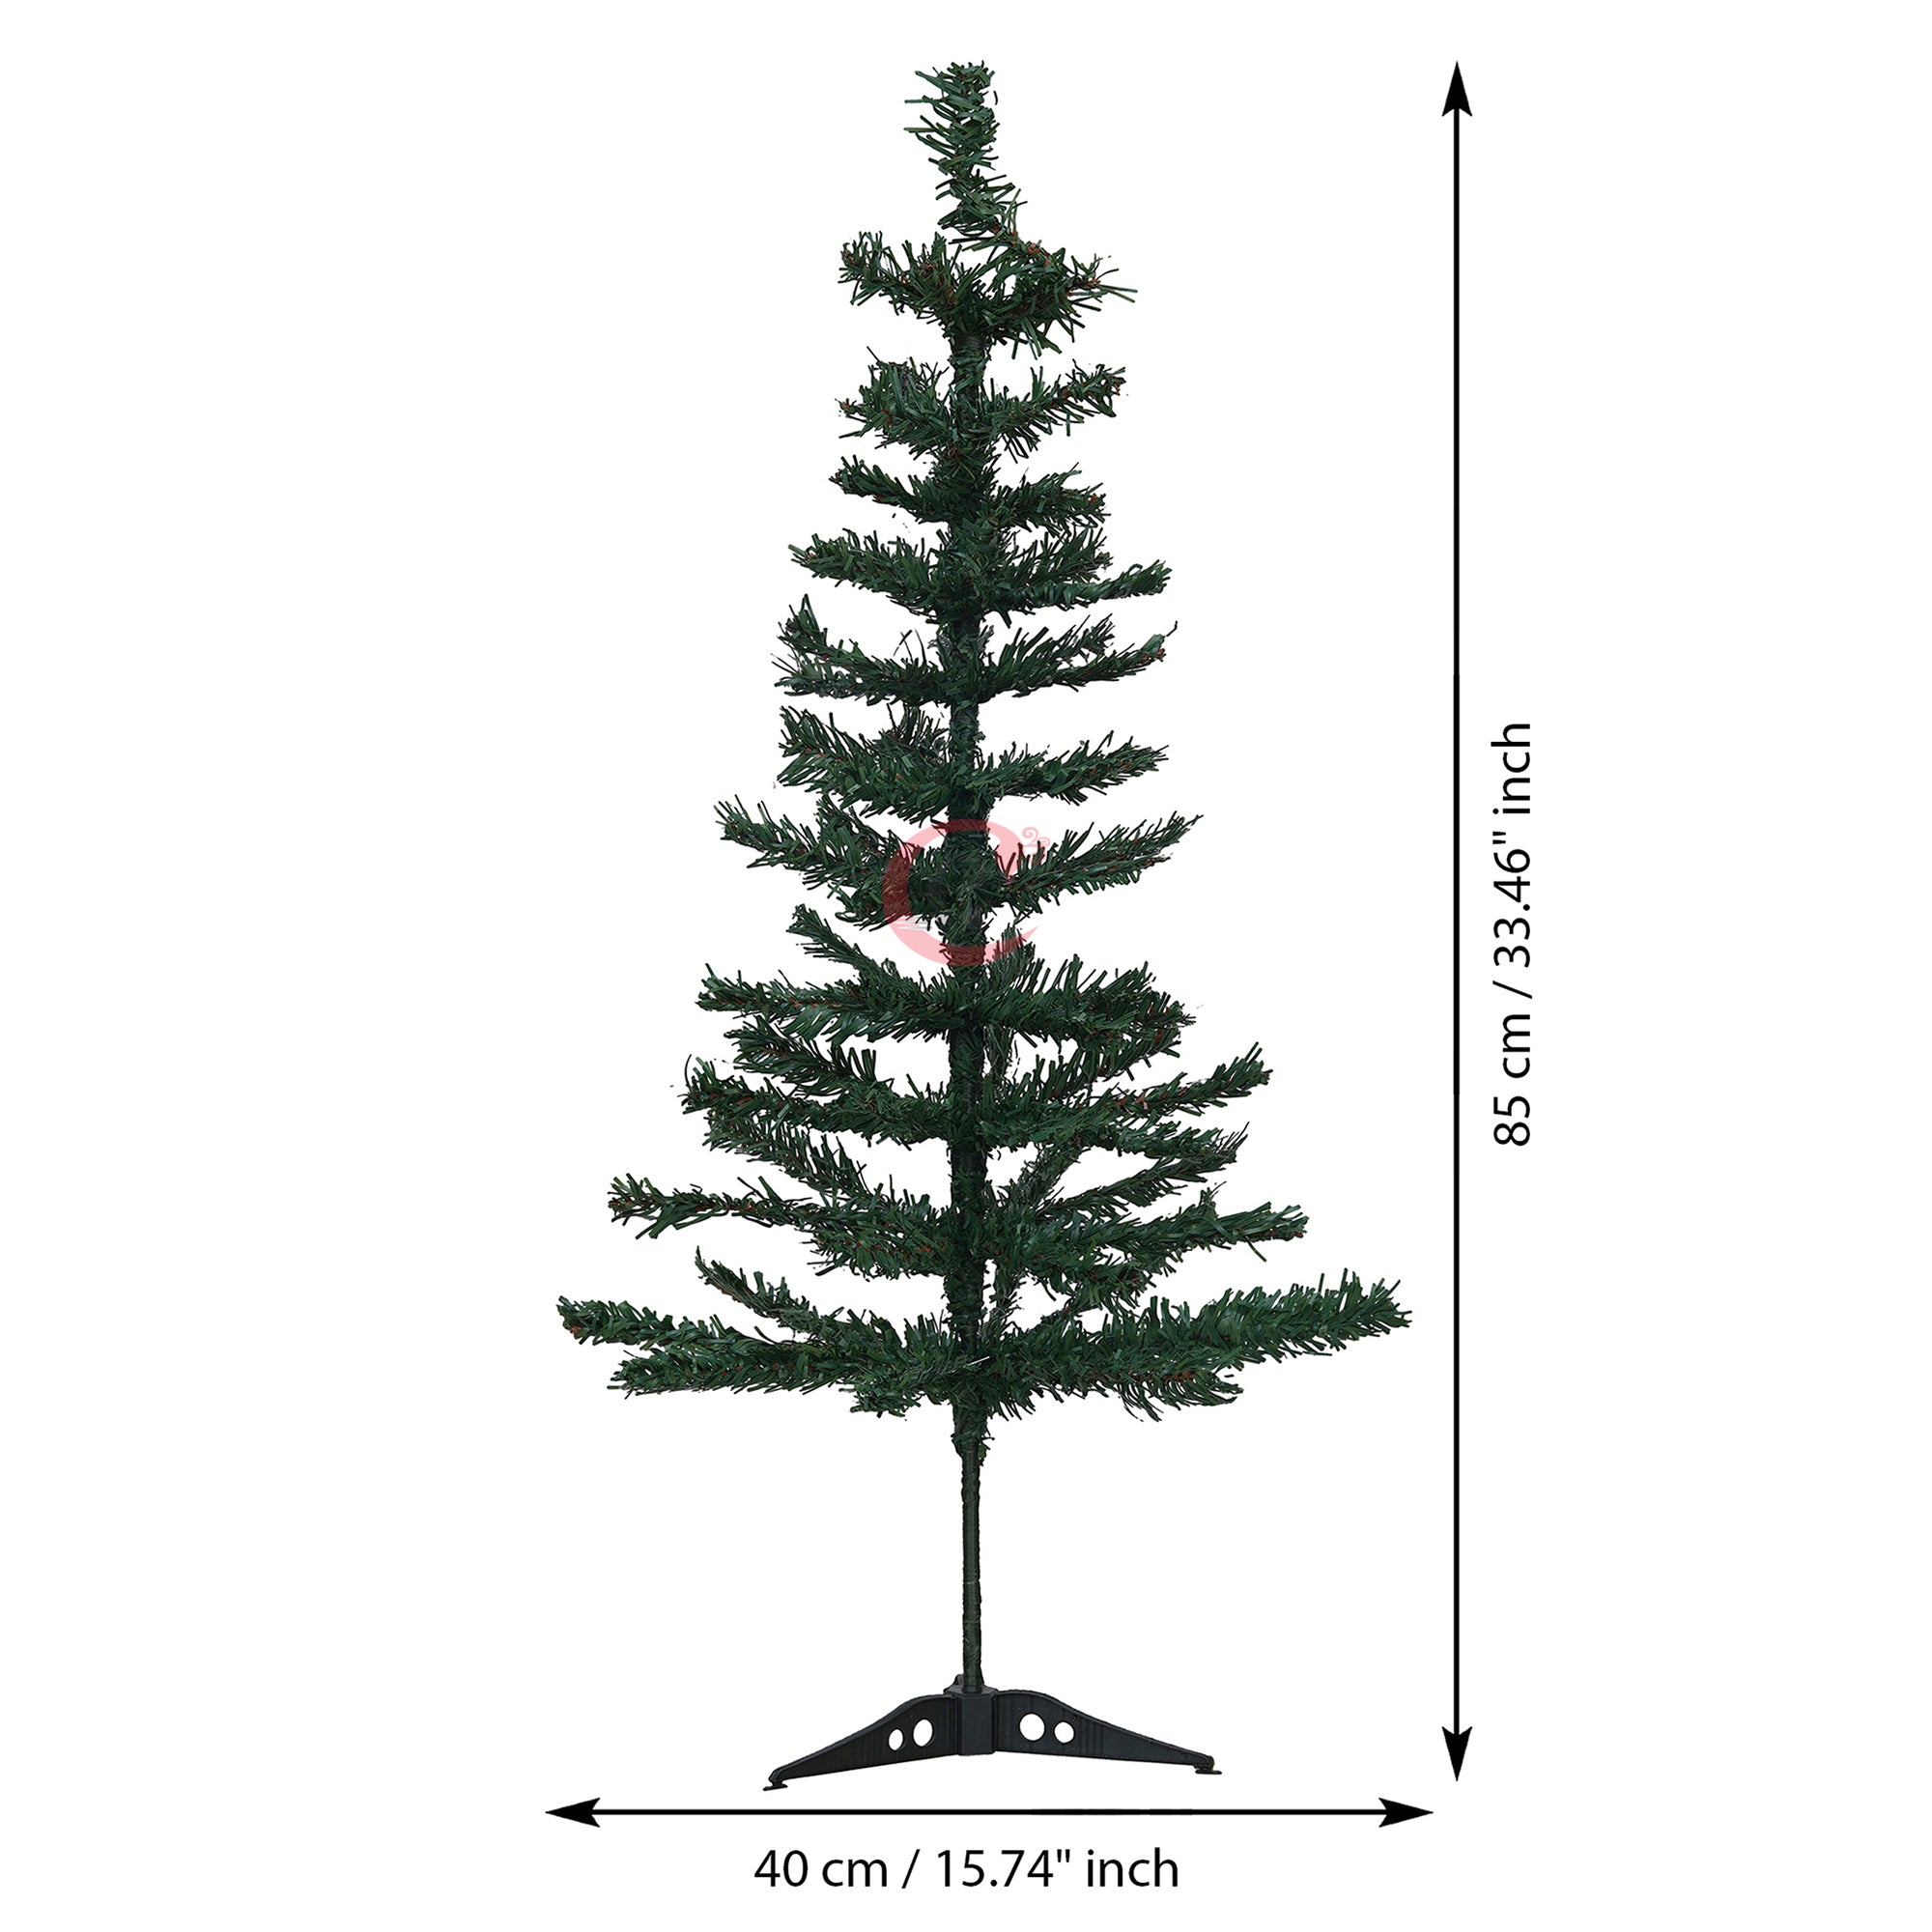 eCraftIndia 3 Feet Green Artificial Christmas Tree Xmas Pine Tree with Metal Stand - Xmas Tree for Indoor, Outdoor, Home, Living Room, Office, Church Decor - Merry Christmas Decoration Item 3